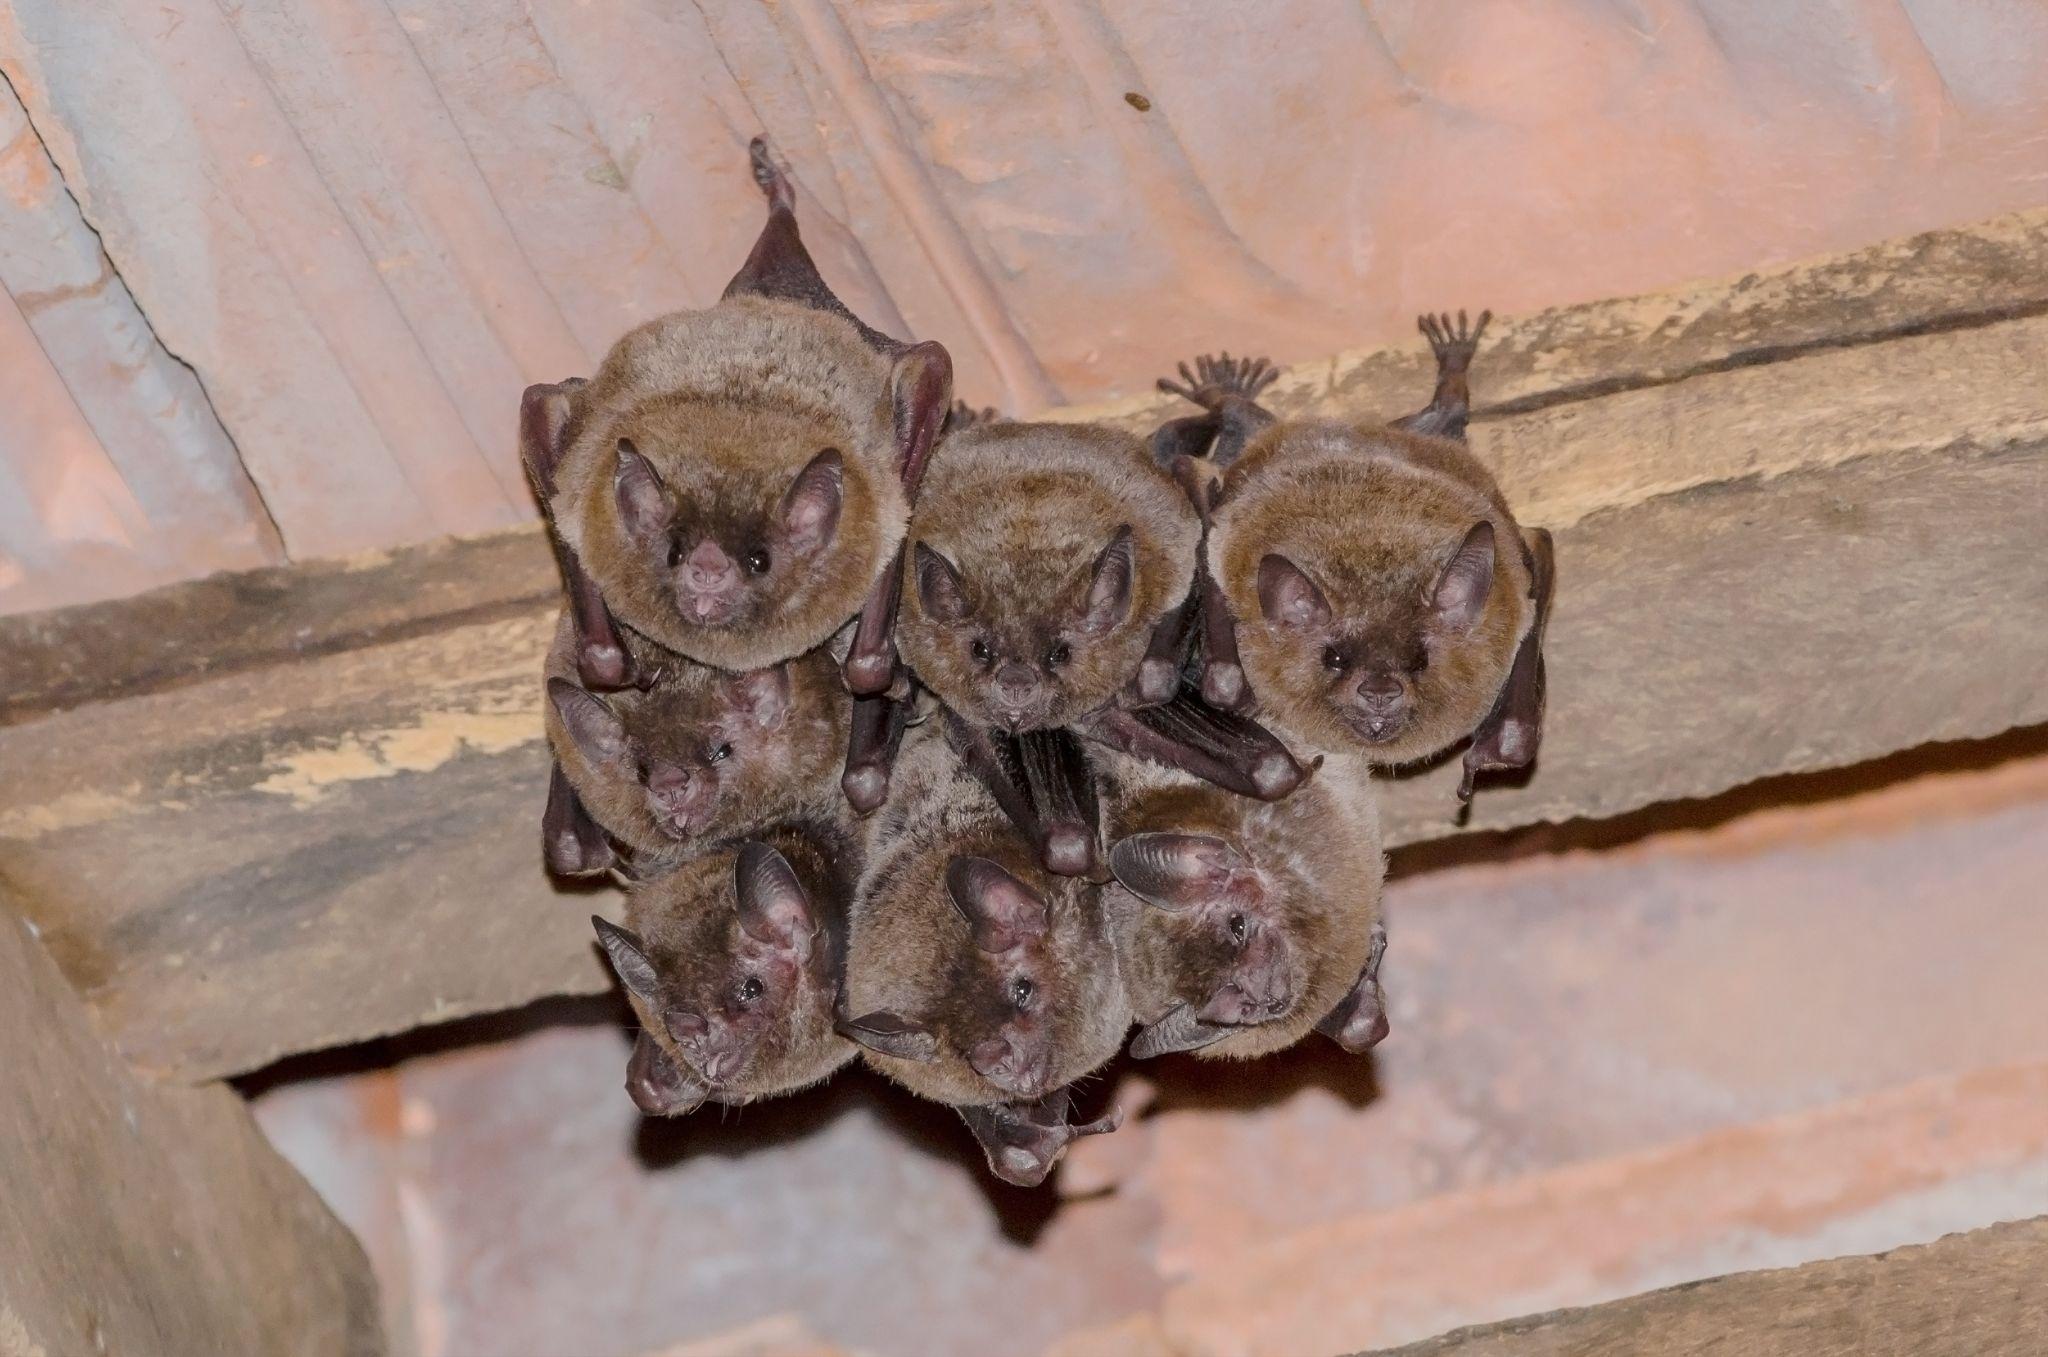 Group of bats living in the attic of a home